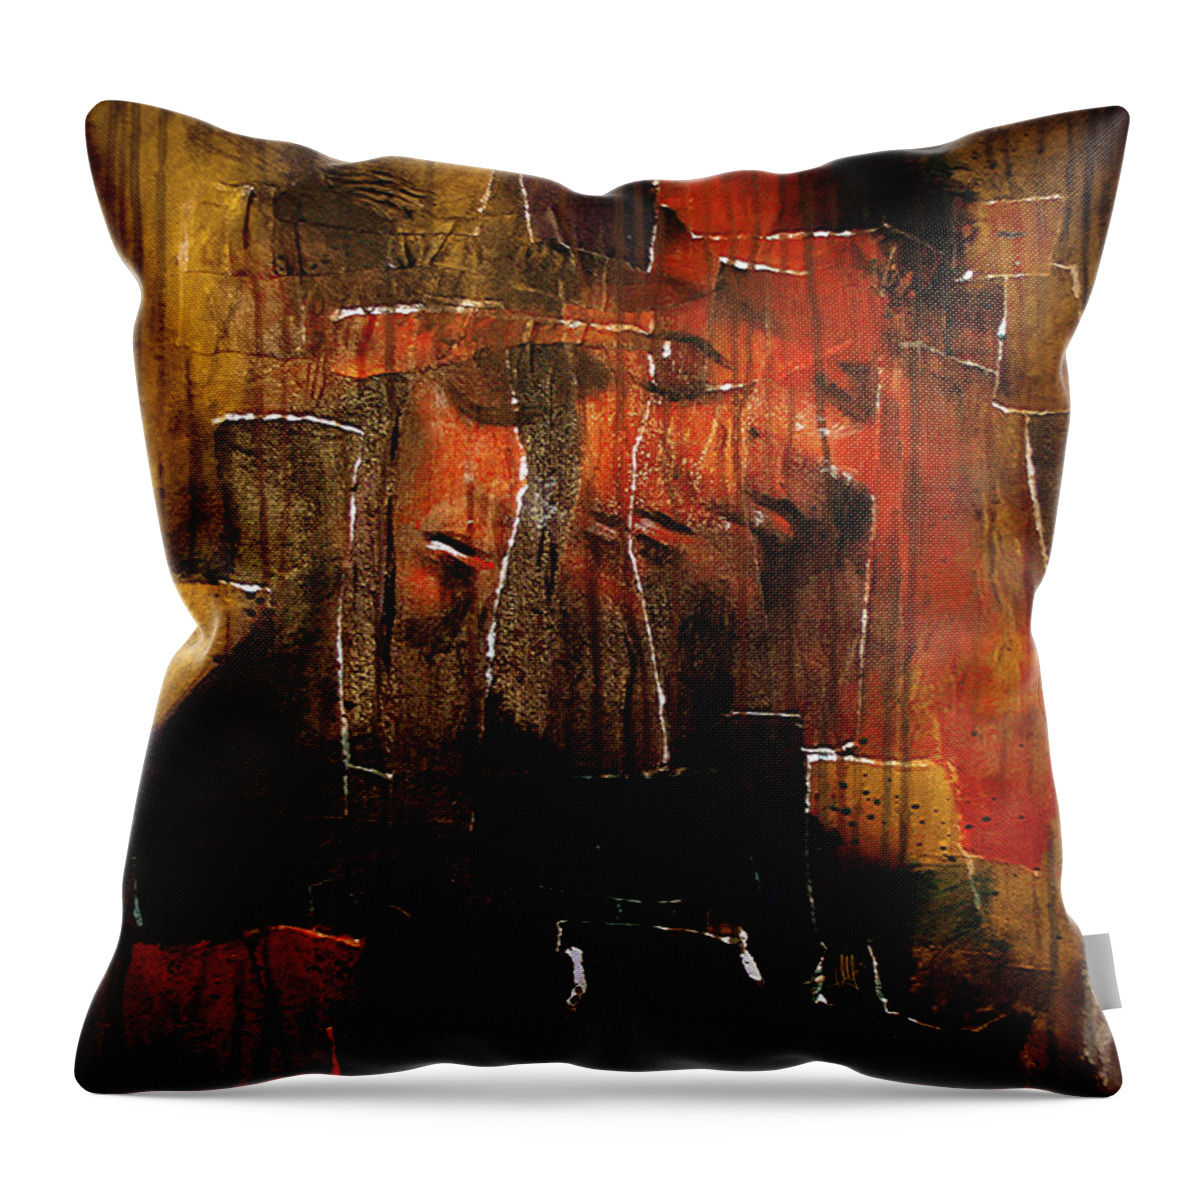 Surreal Throw Pillow featuring the painting Test for Deconstruction by Mario Sanchez Nevado